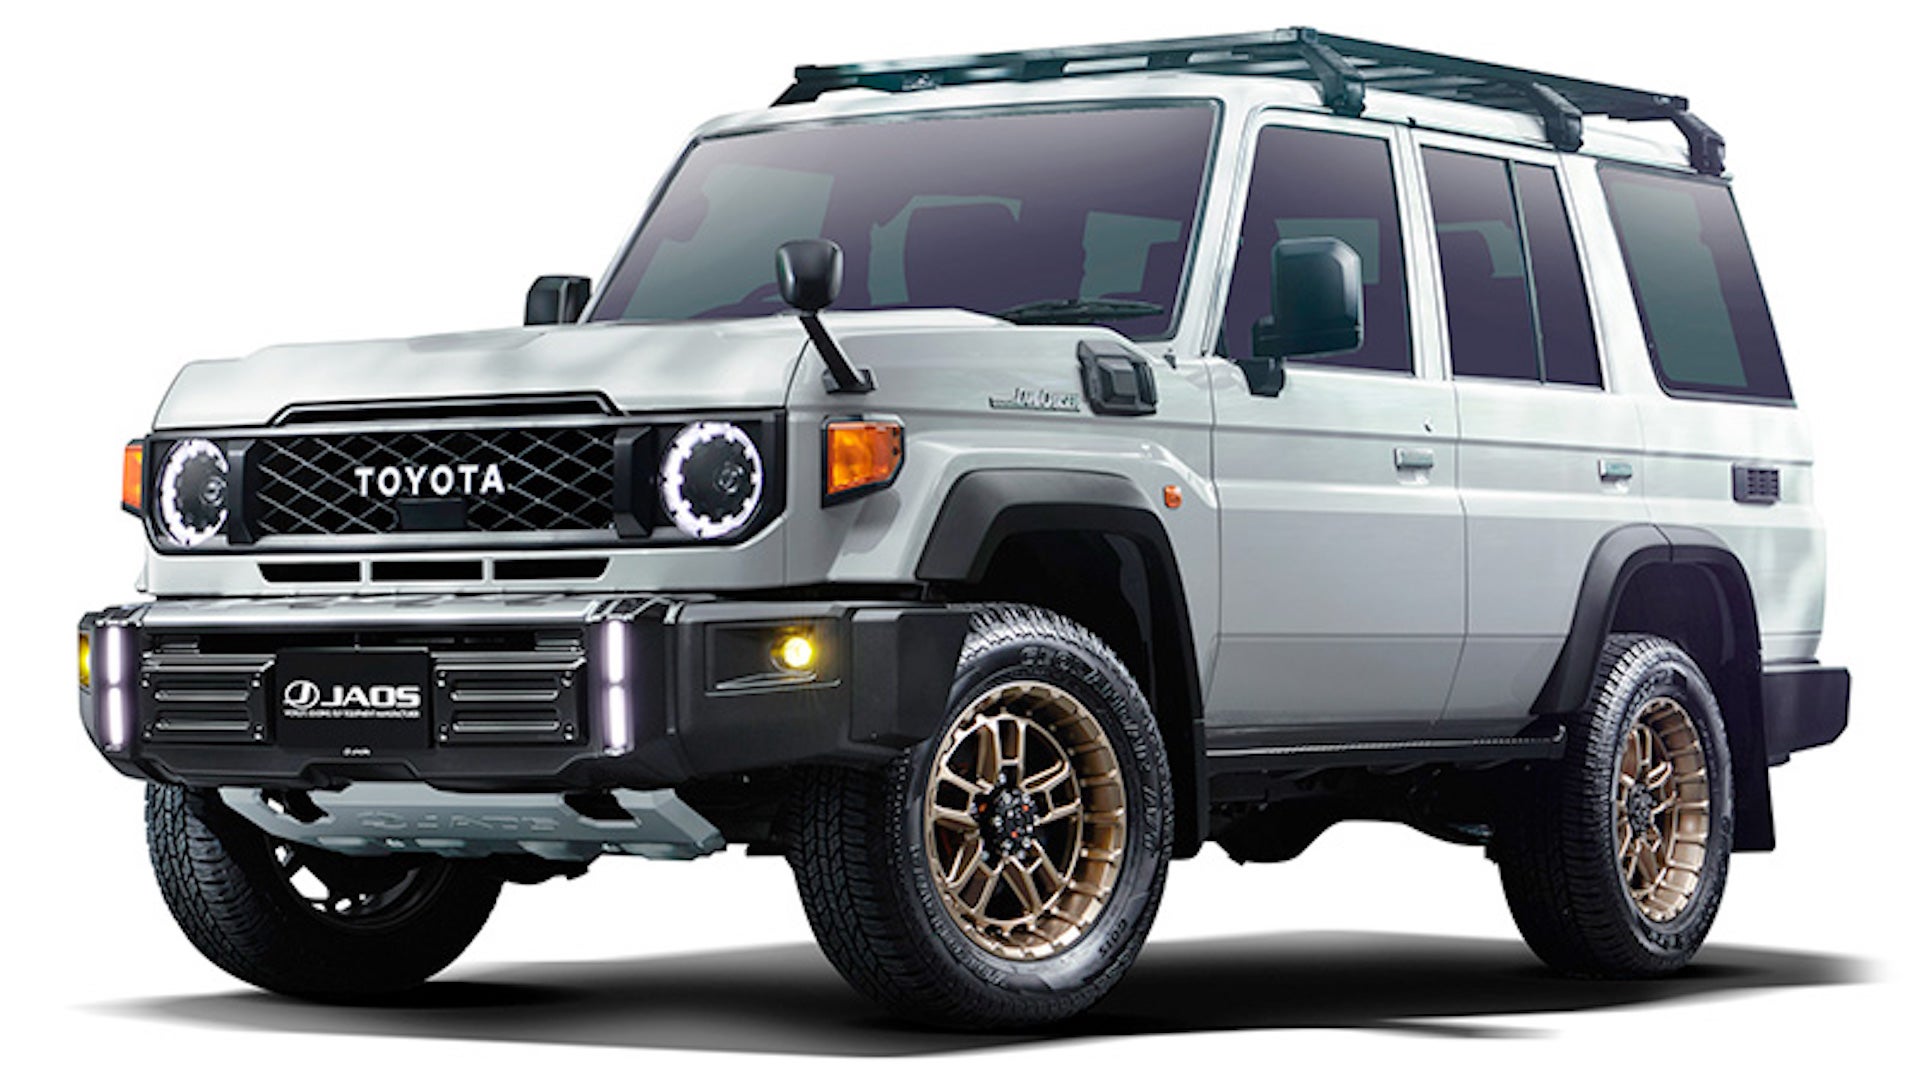 The new custom parts for Toyota’s Land Cruiser 70 are well-crafted.